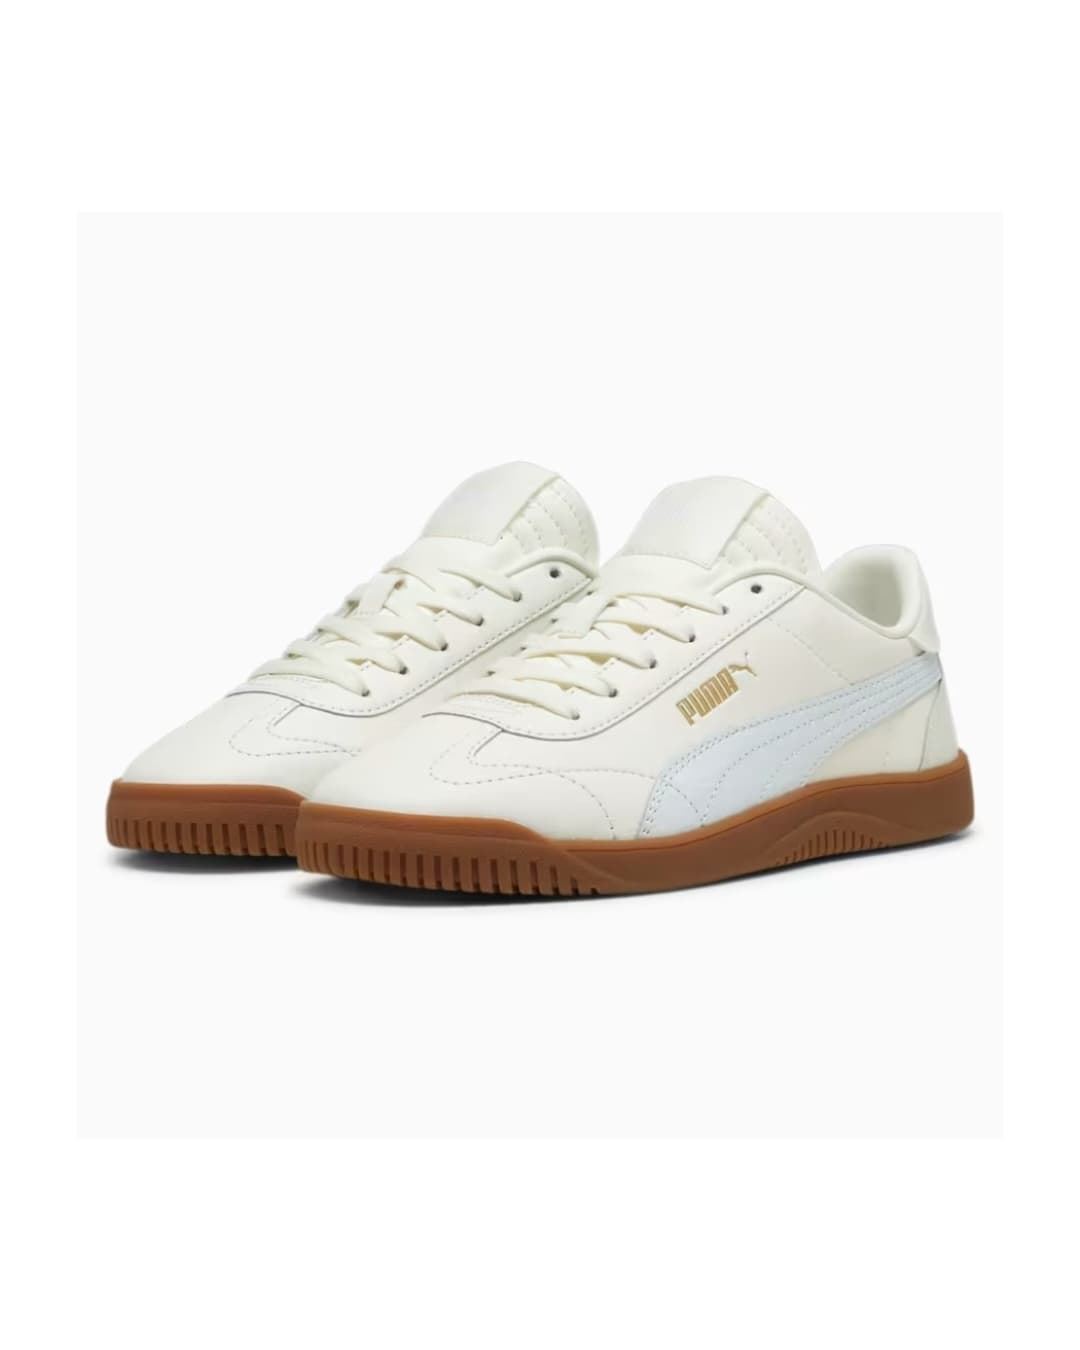 Puma Club 5v5 Sneakers for girls and women - Image 1